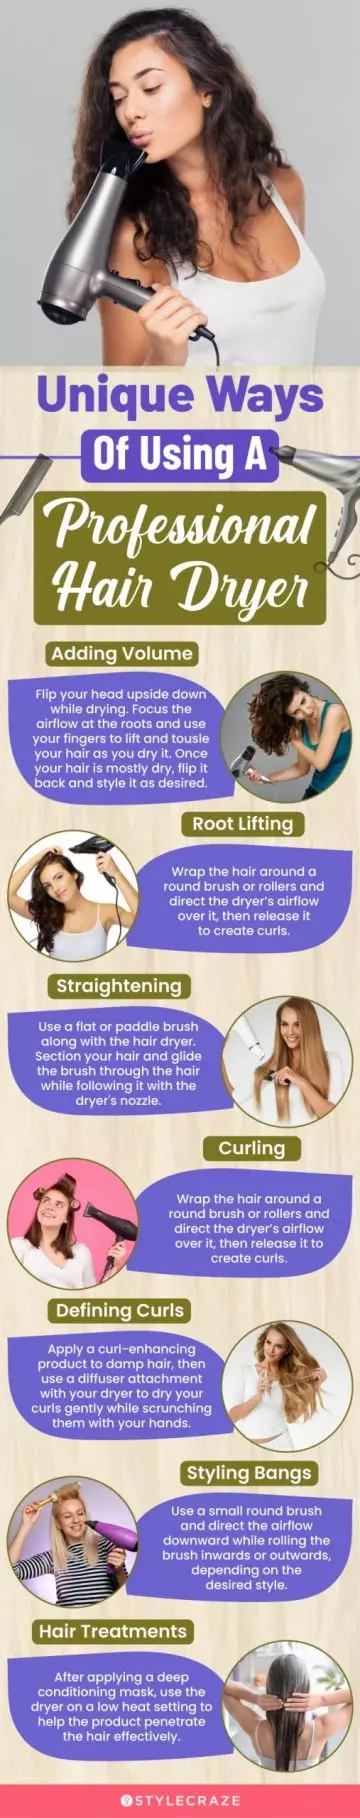 Unique Ways Of Using A Professional Hair Dryer (infographic)